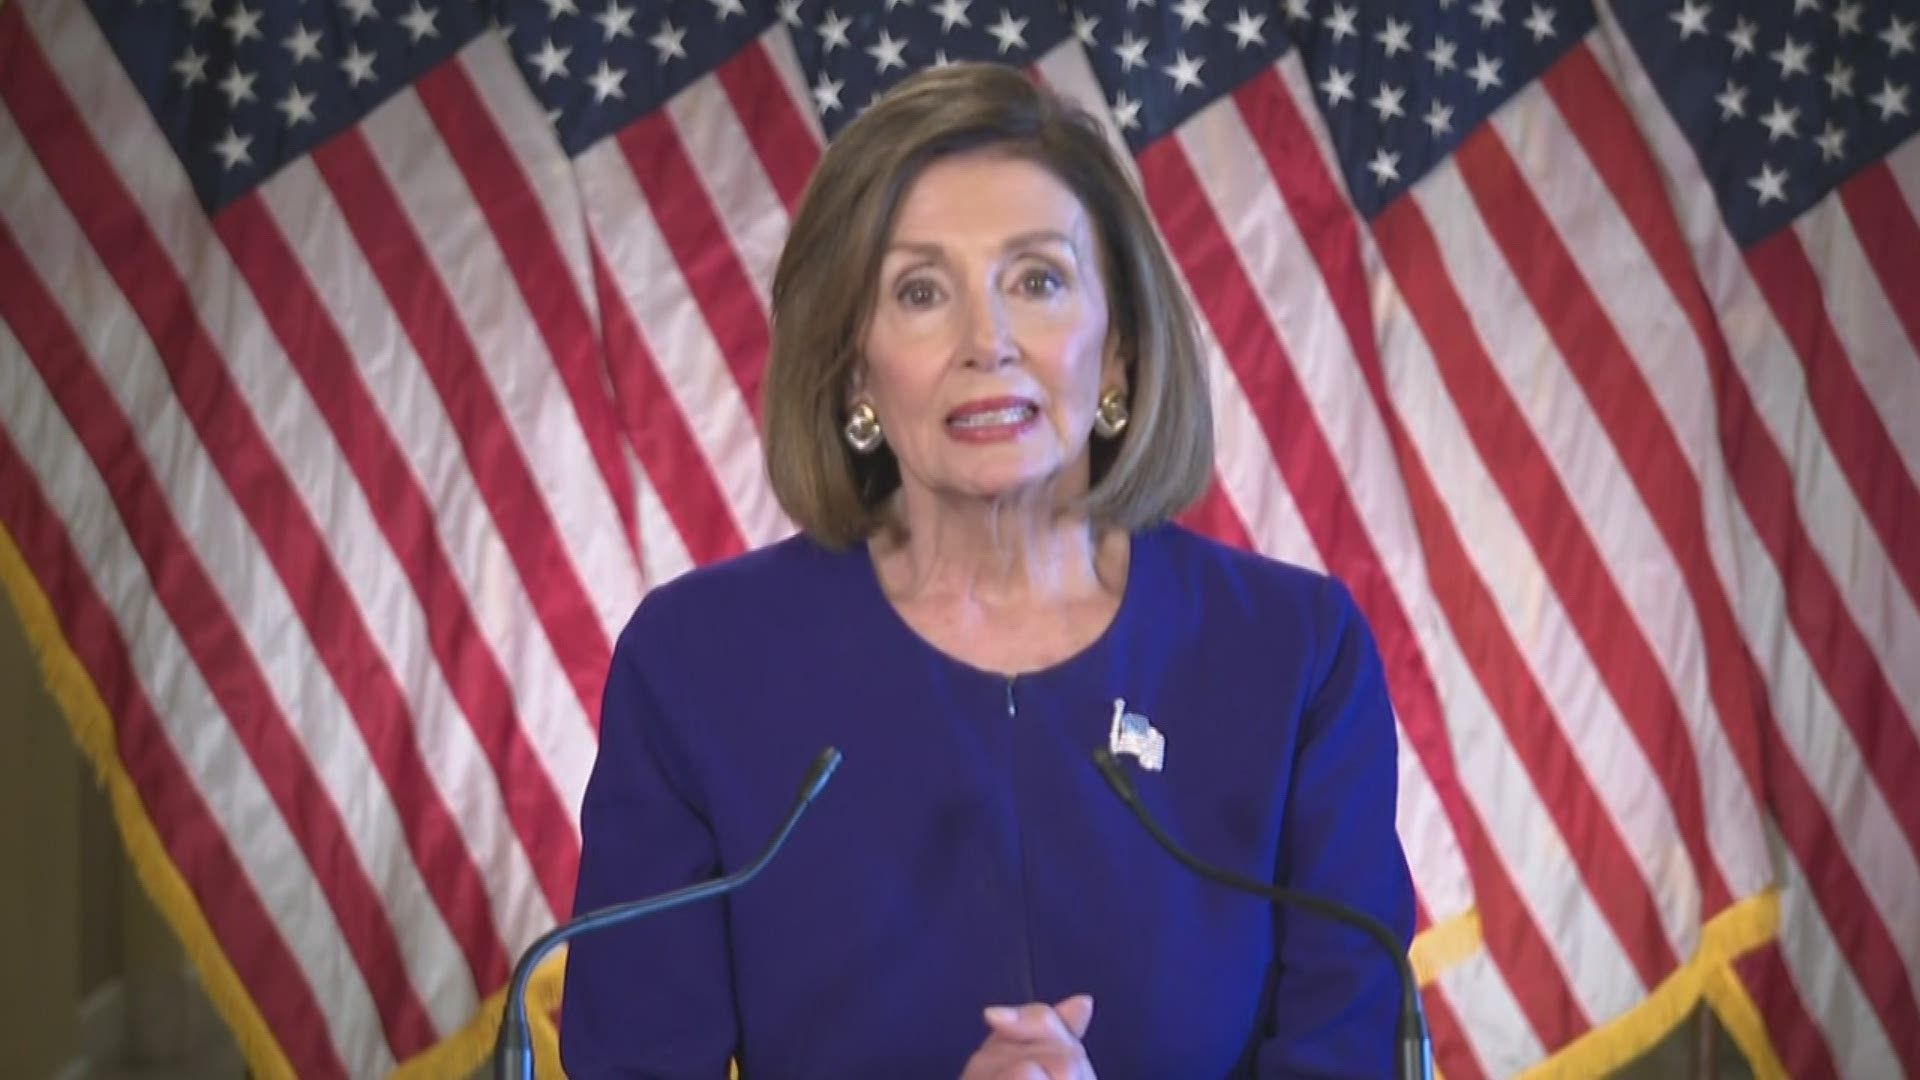 House Speaker Nancy Pelosi announced Tuesday that the House is moving forward with an official impeachment inquiry, saying 'no one is above the law.'